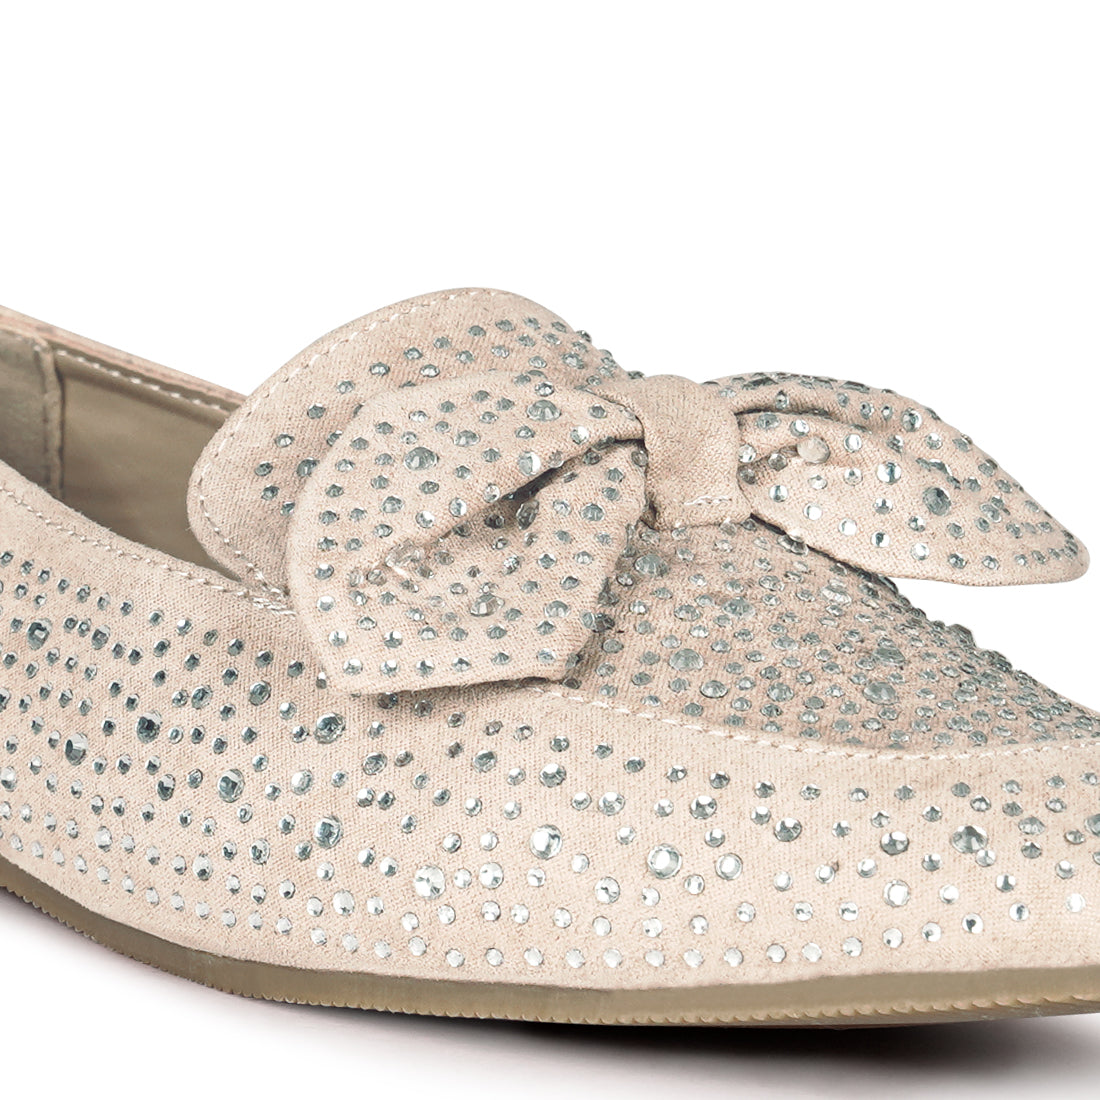 Dewdrops Embellished Casual Bow Loafer in Beige